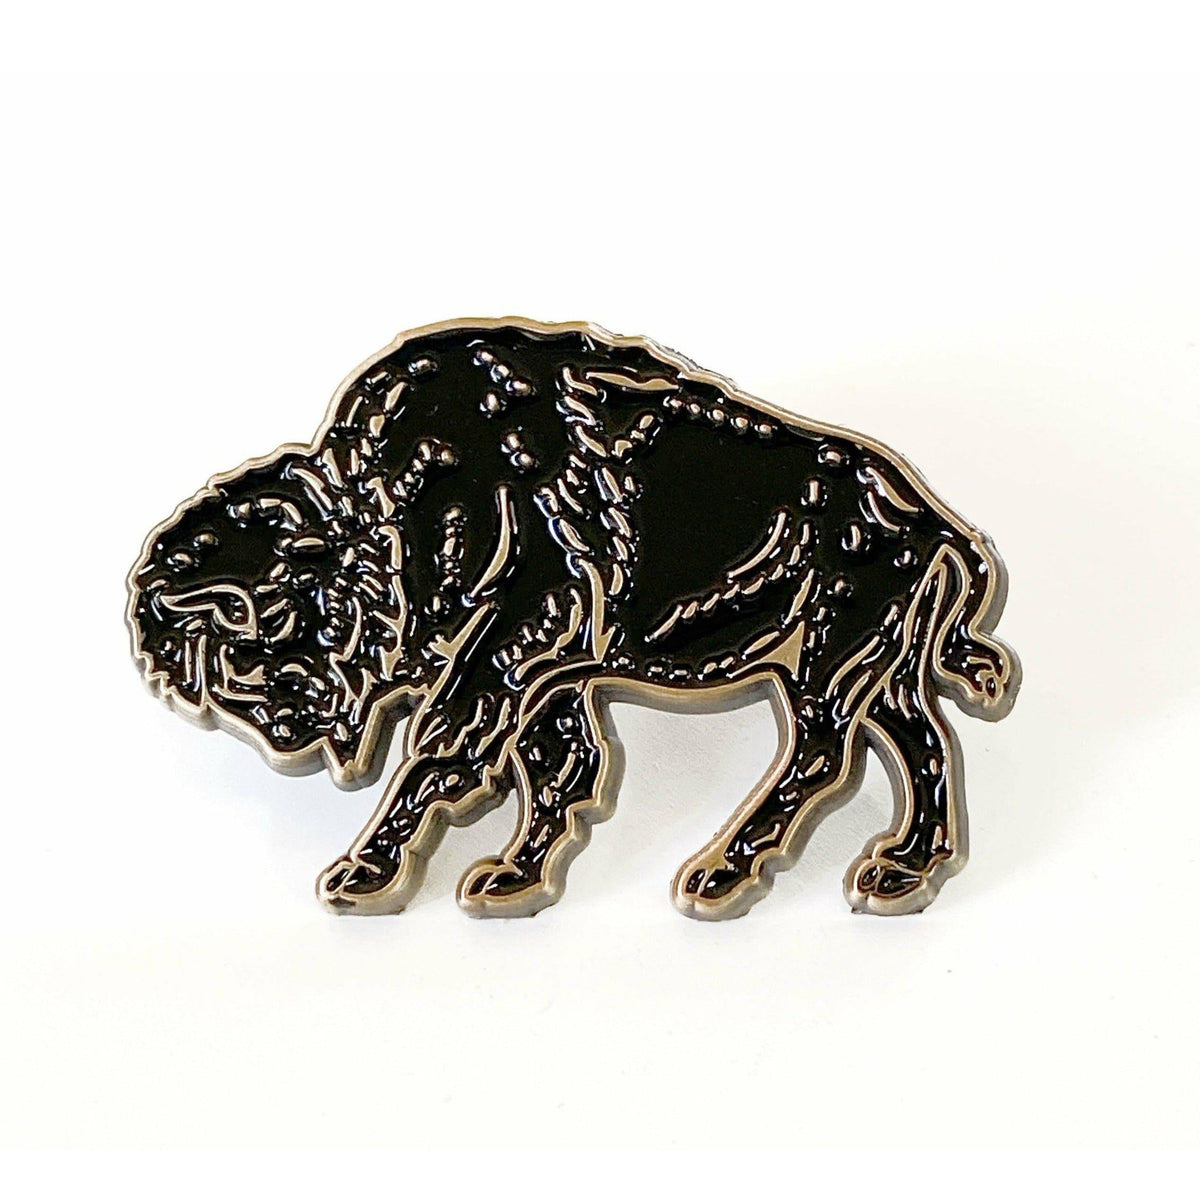 A black and gold Bison Enamel Pin by The Wild Wander.